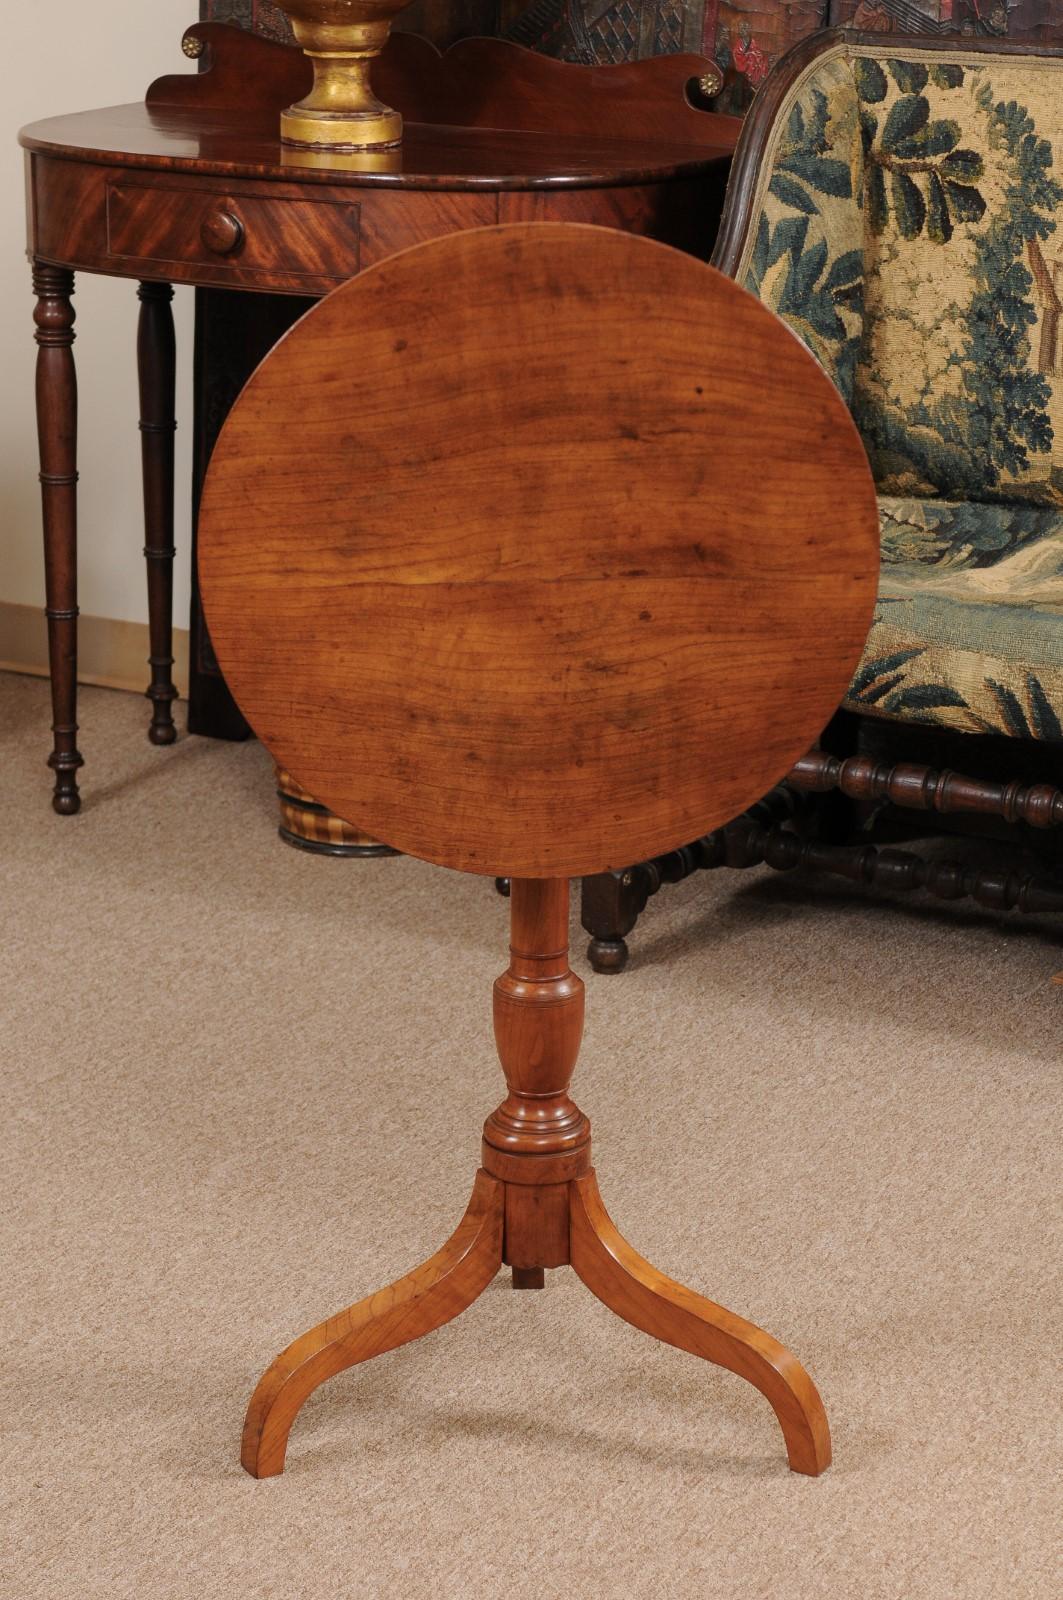 Pennsylvania Federal Style Applewood Candle Stand, 19th Century 1